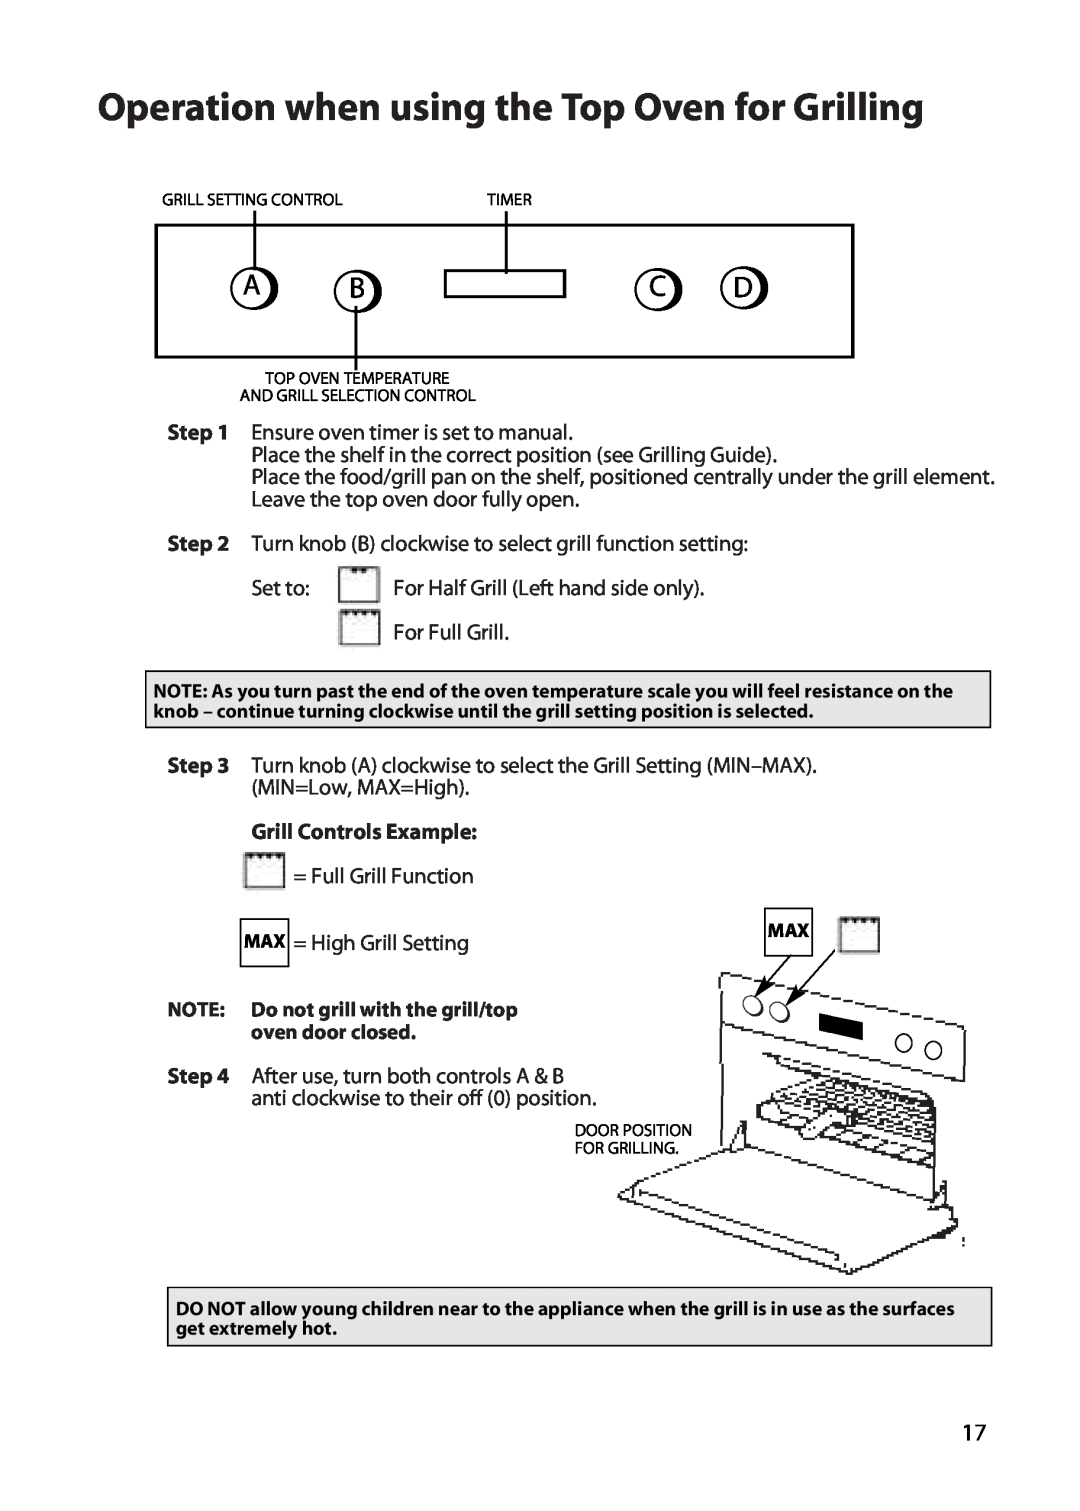 Hotpoint DD77 DT77 manual Operation when using the Top Oven for Grilling, Grill Controls Example 